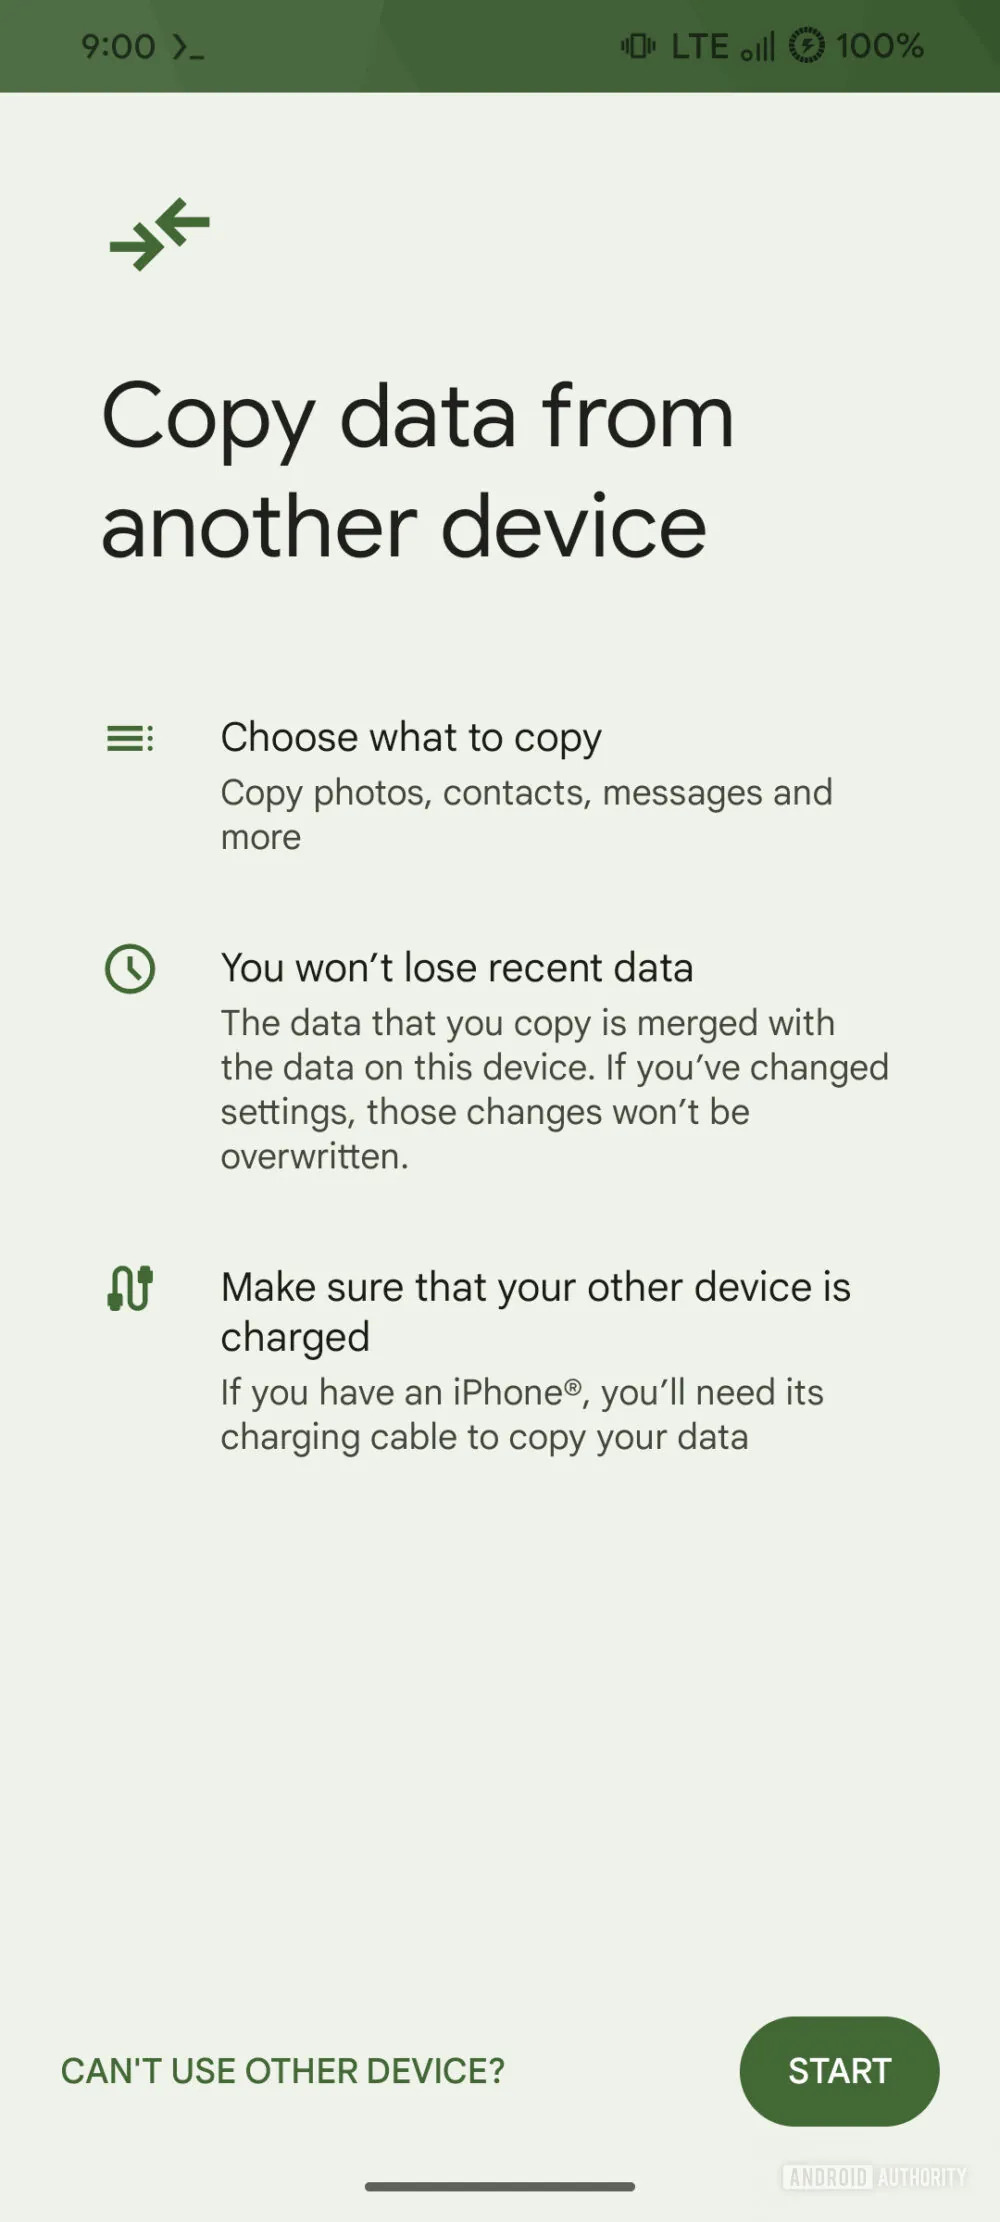 Copy data from another device